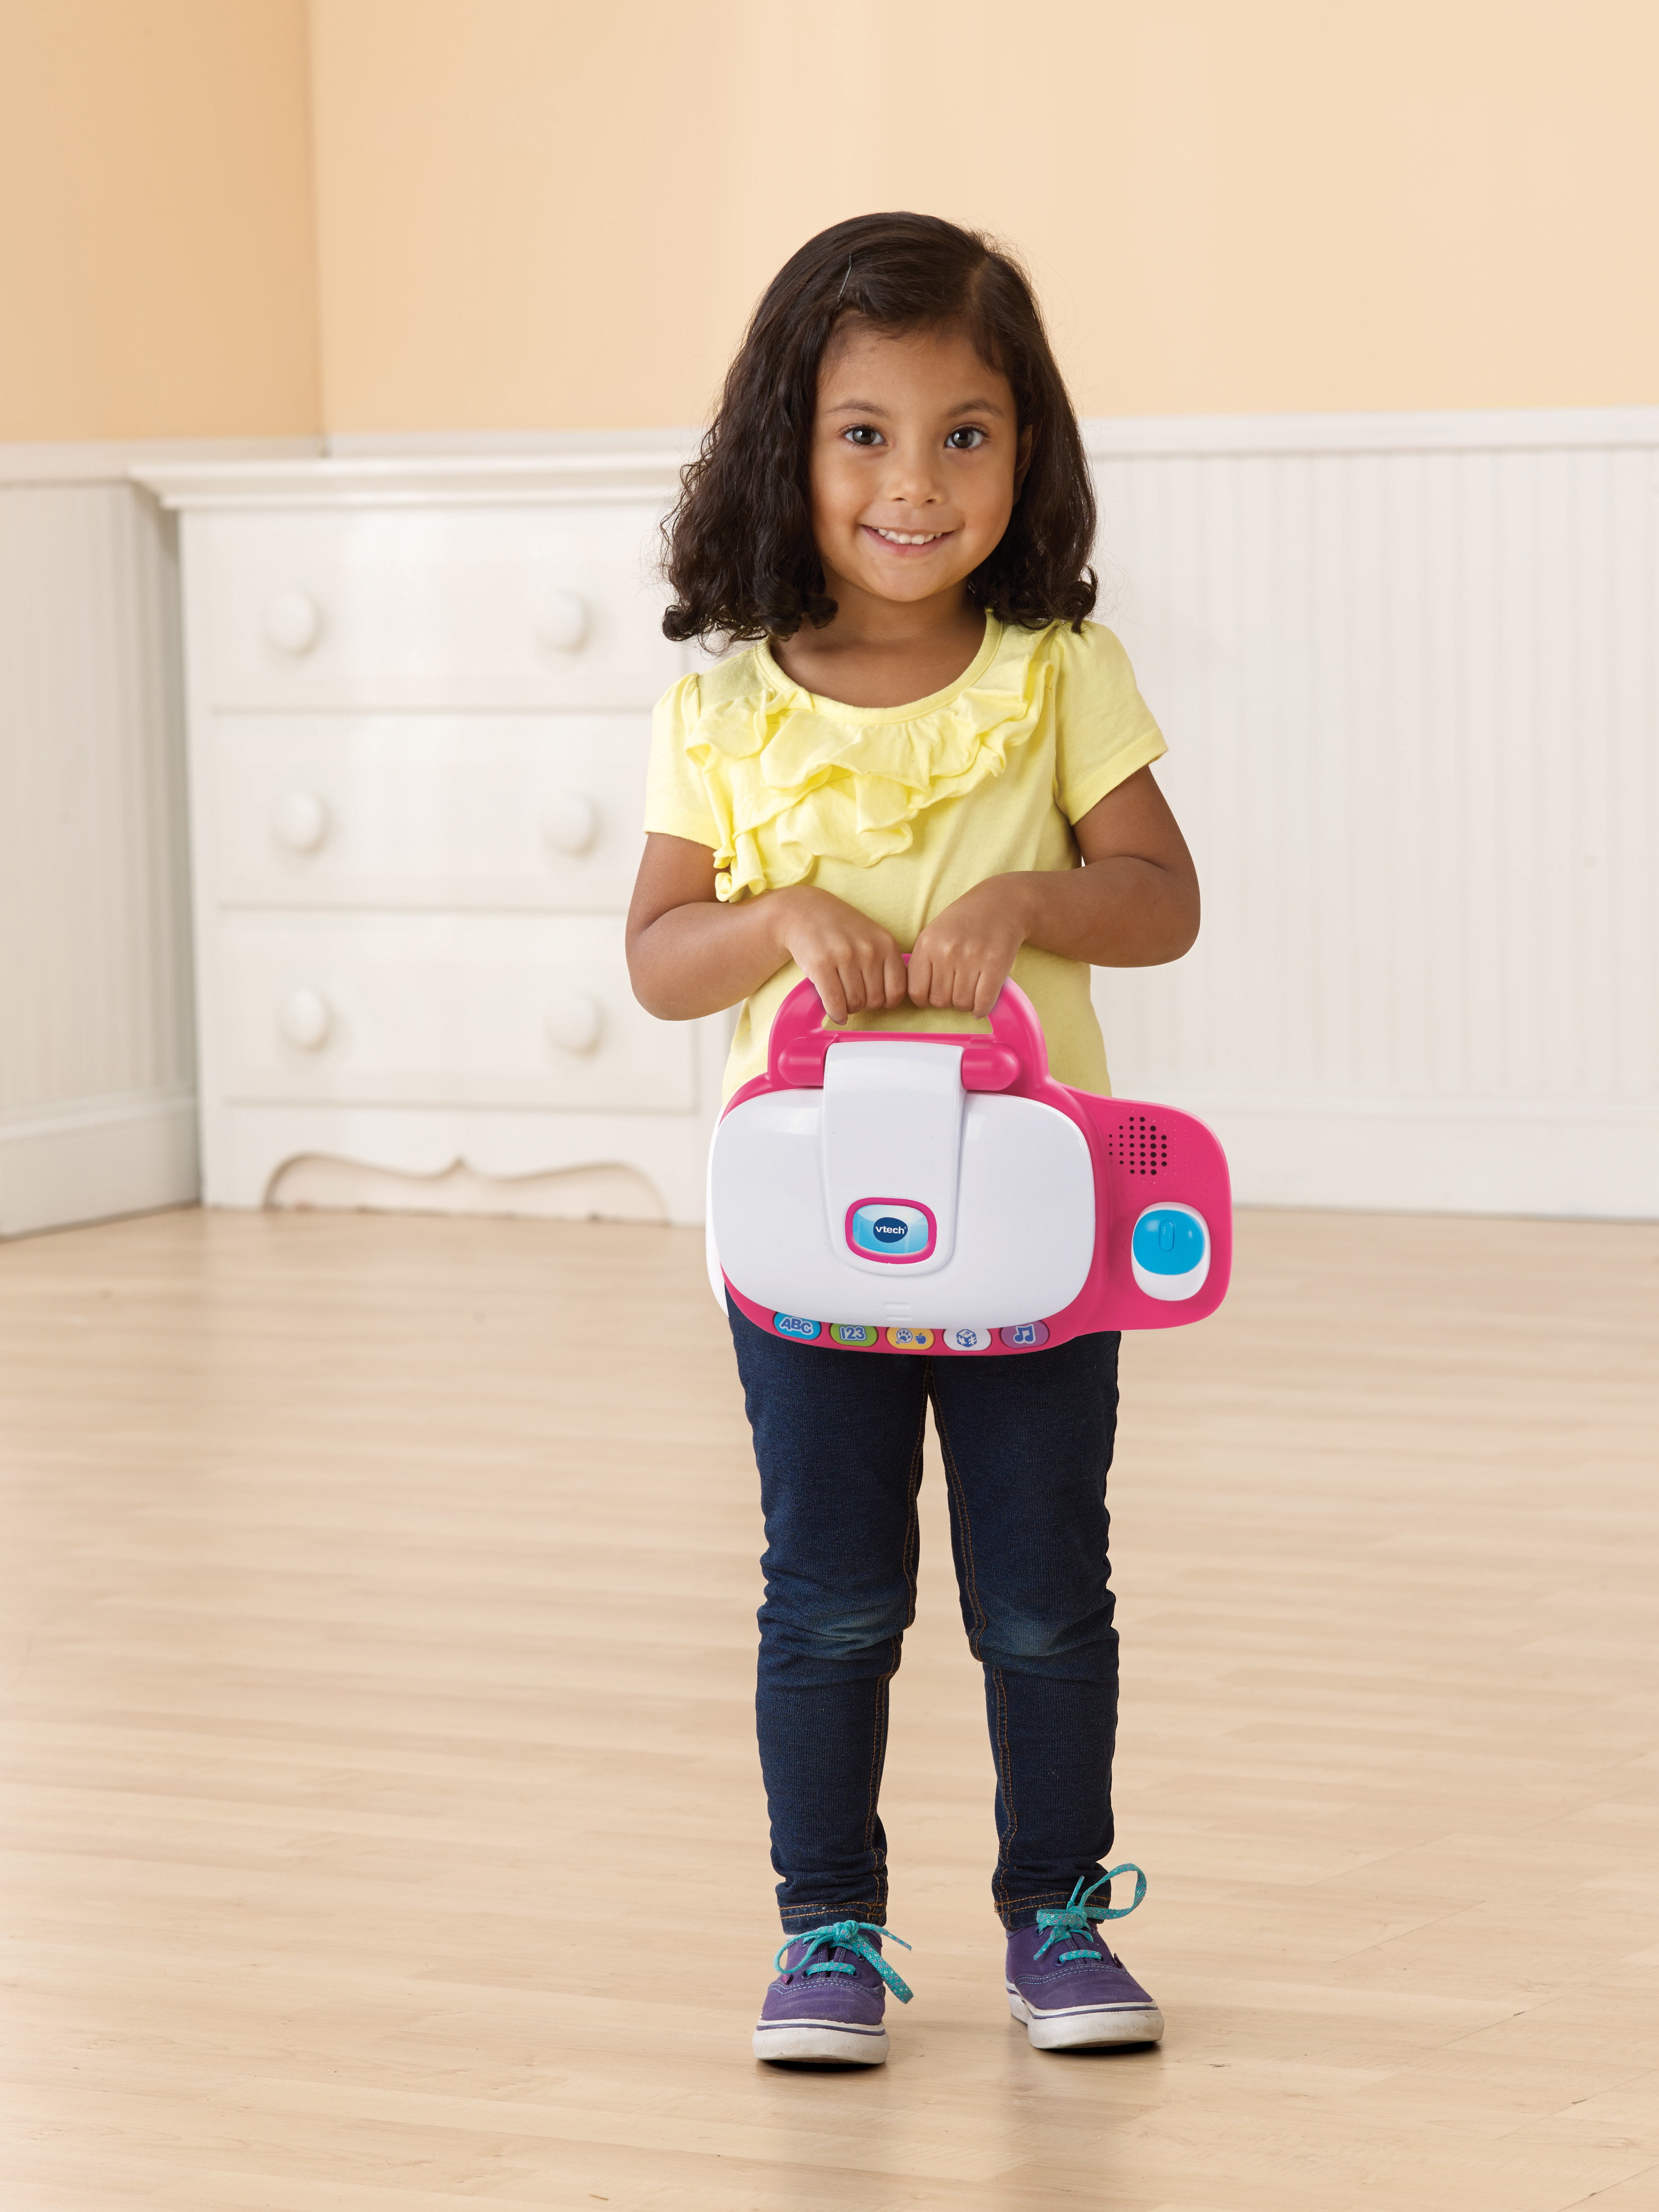 vtech, Toys, Vtech Tote N Go Pink Laptop With Mouse